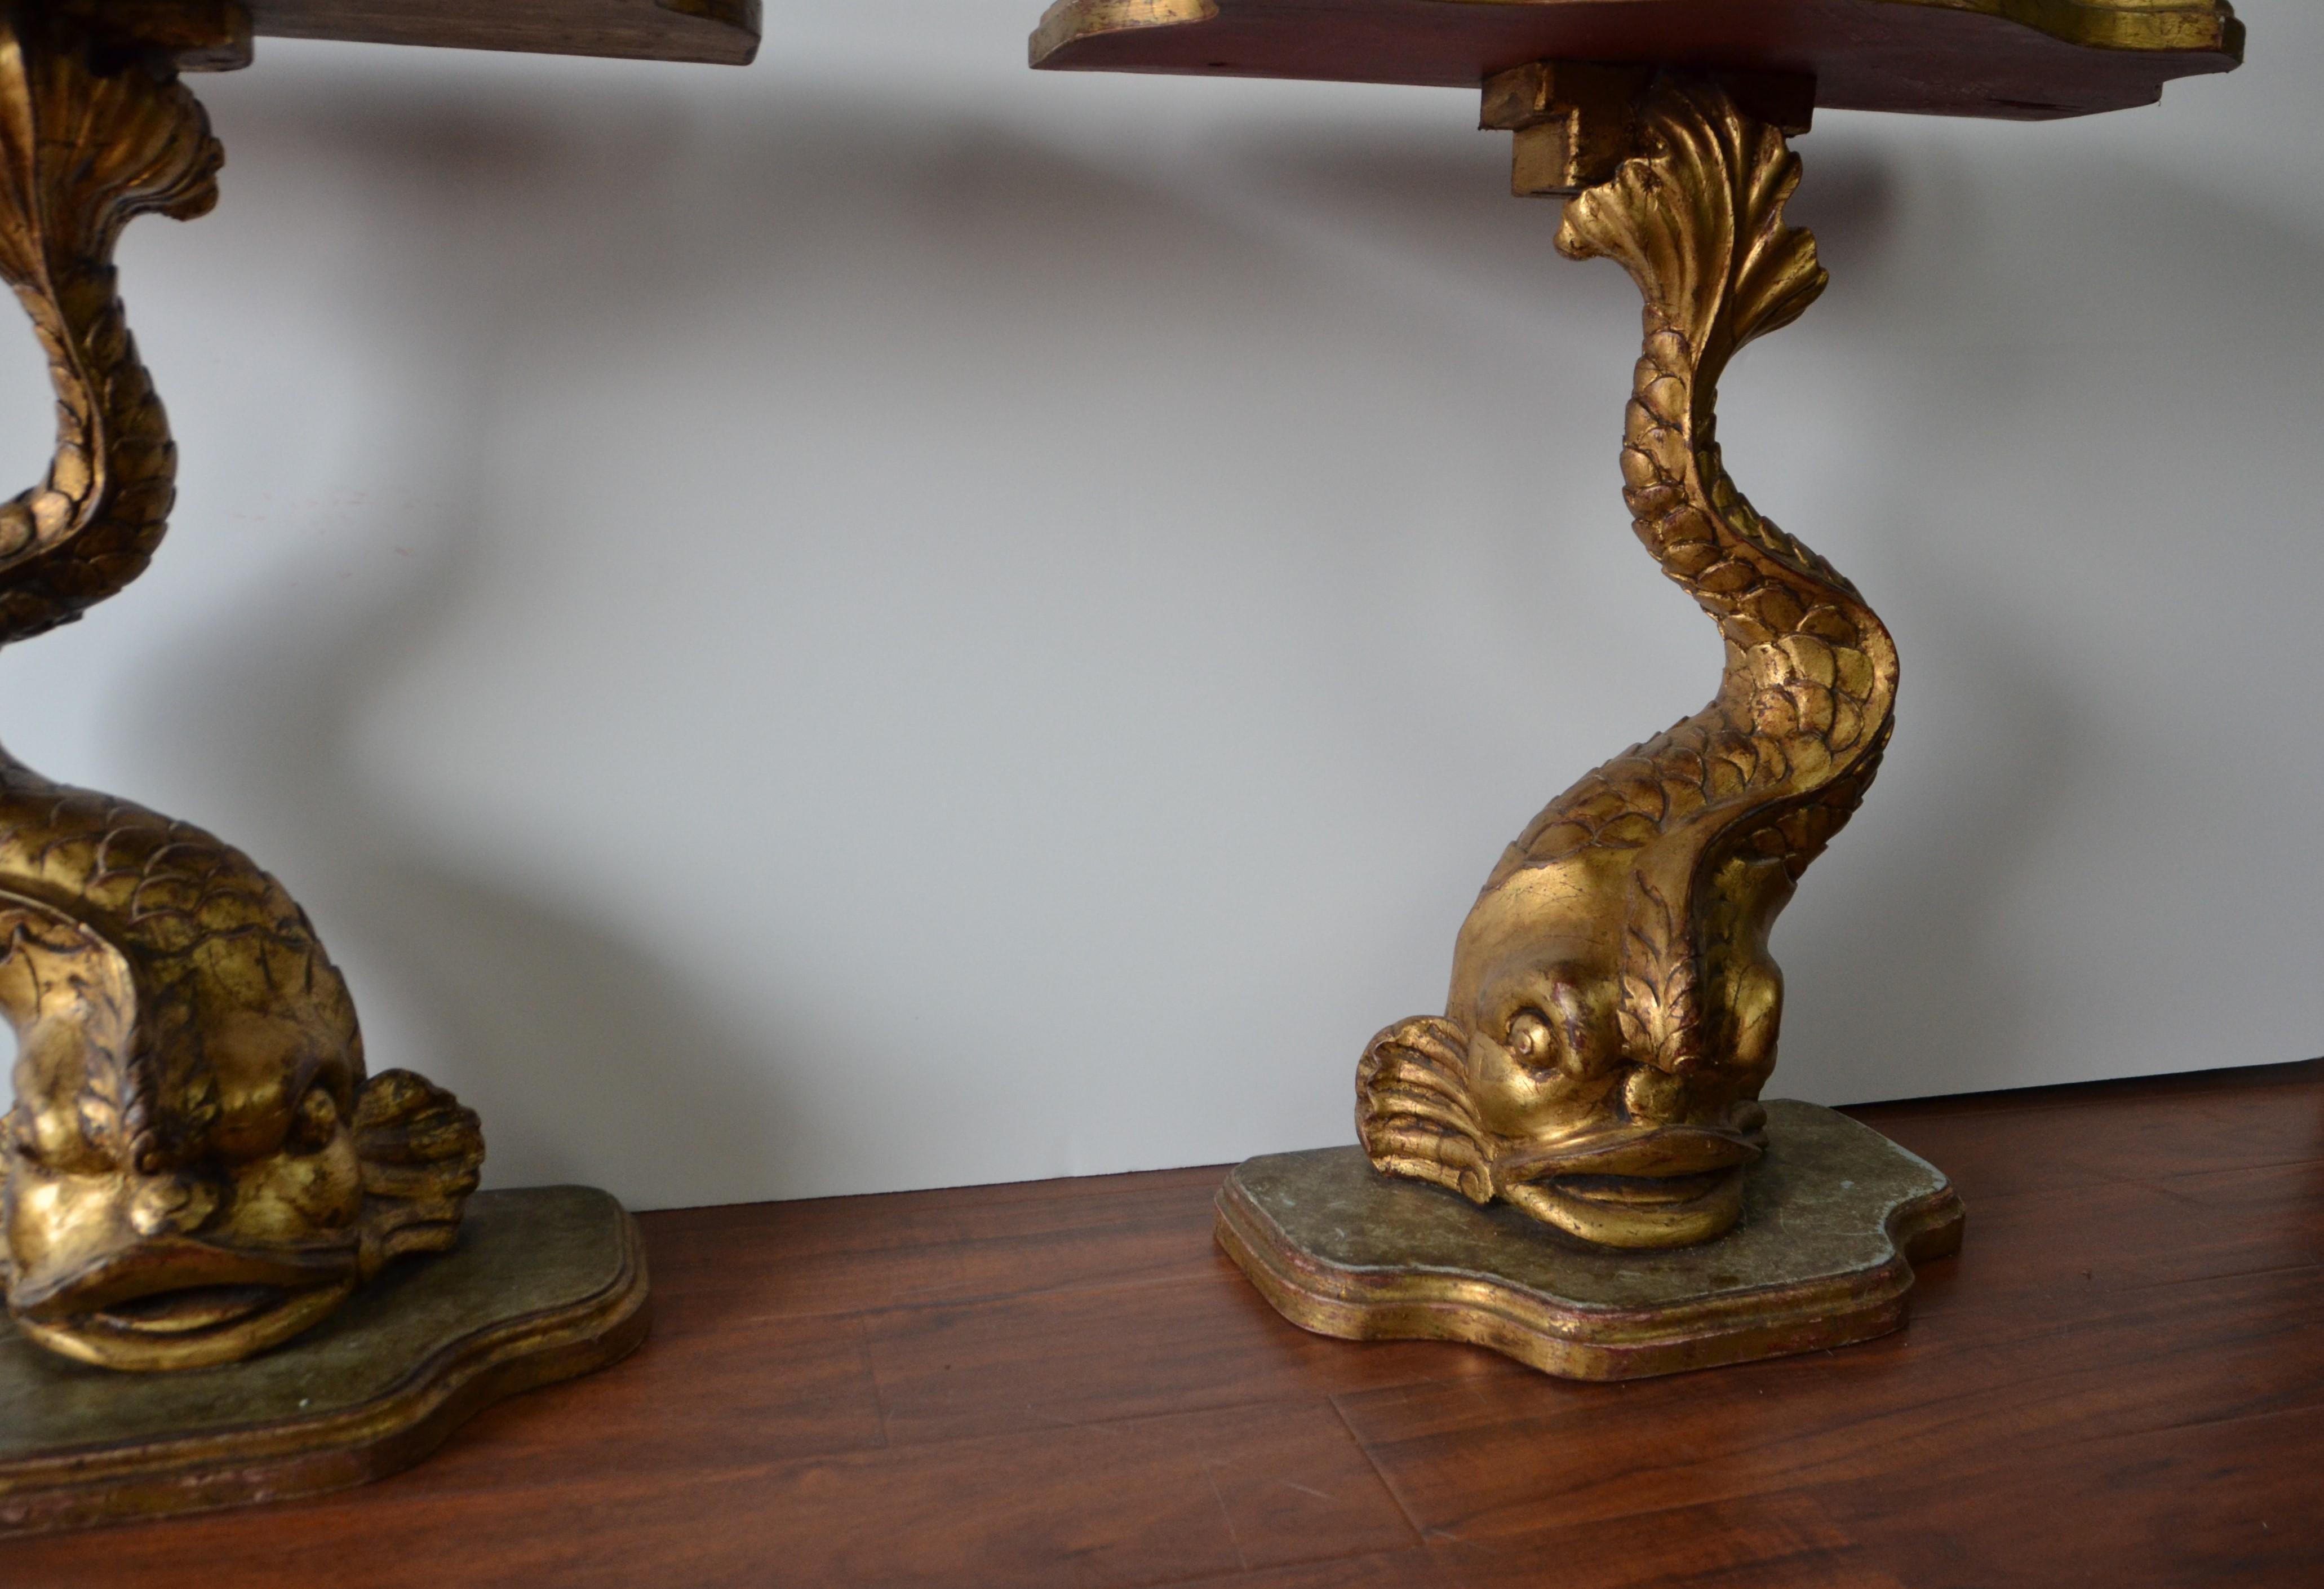 A very decorative pair of gilt finished end tables with the supports designed as dolphin style sea-creatures. The tables are serpentine fronted, hand carved wood and fitted with glass tops.